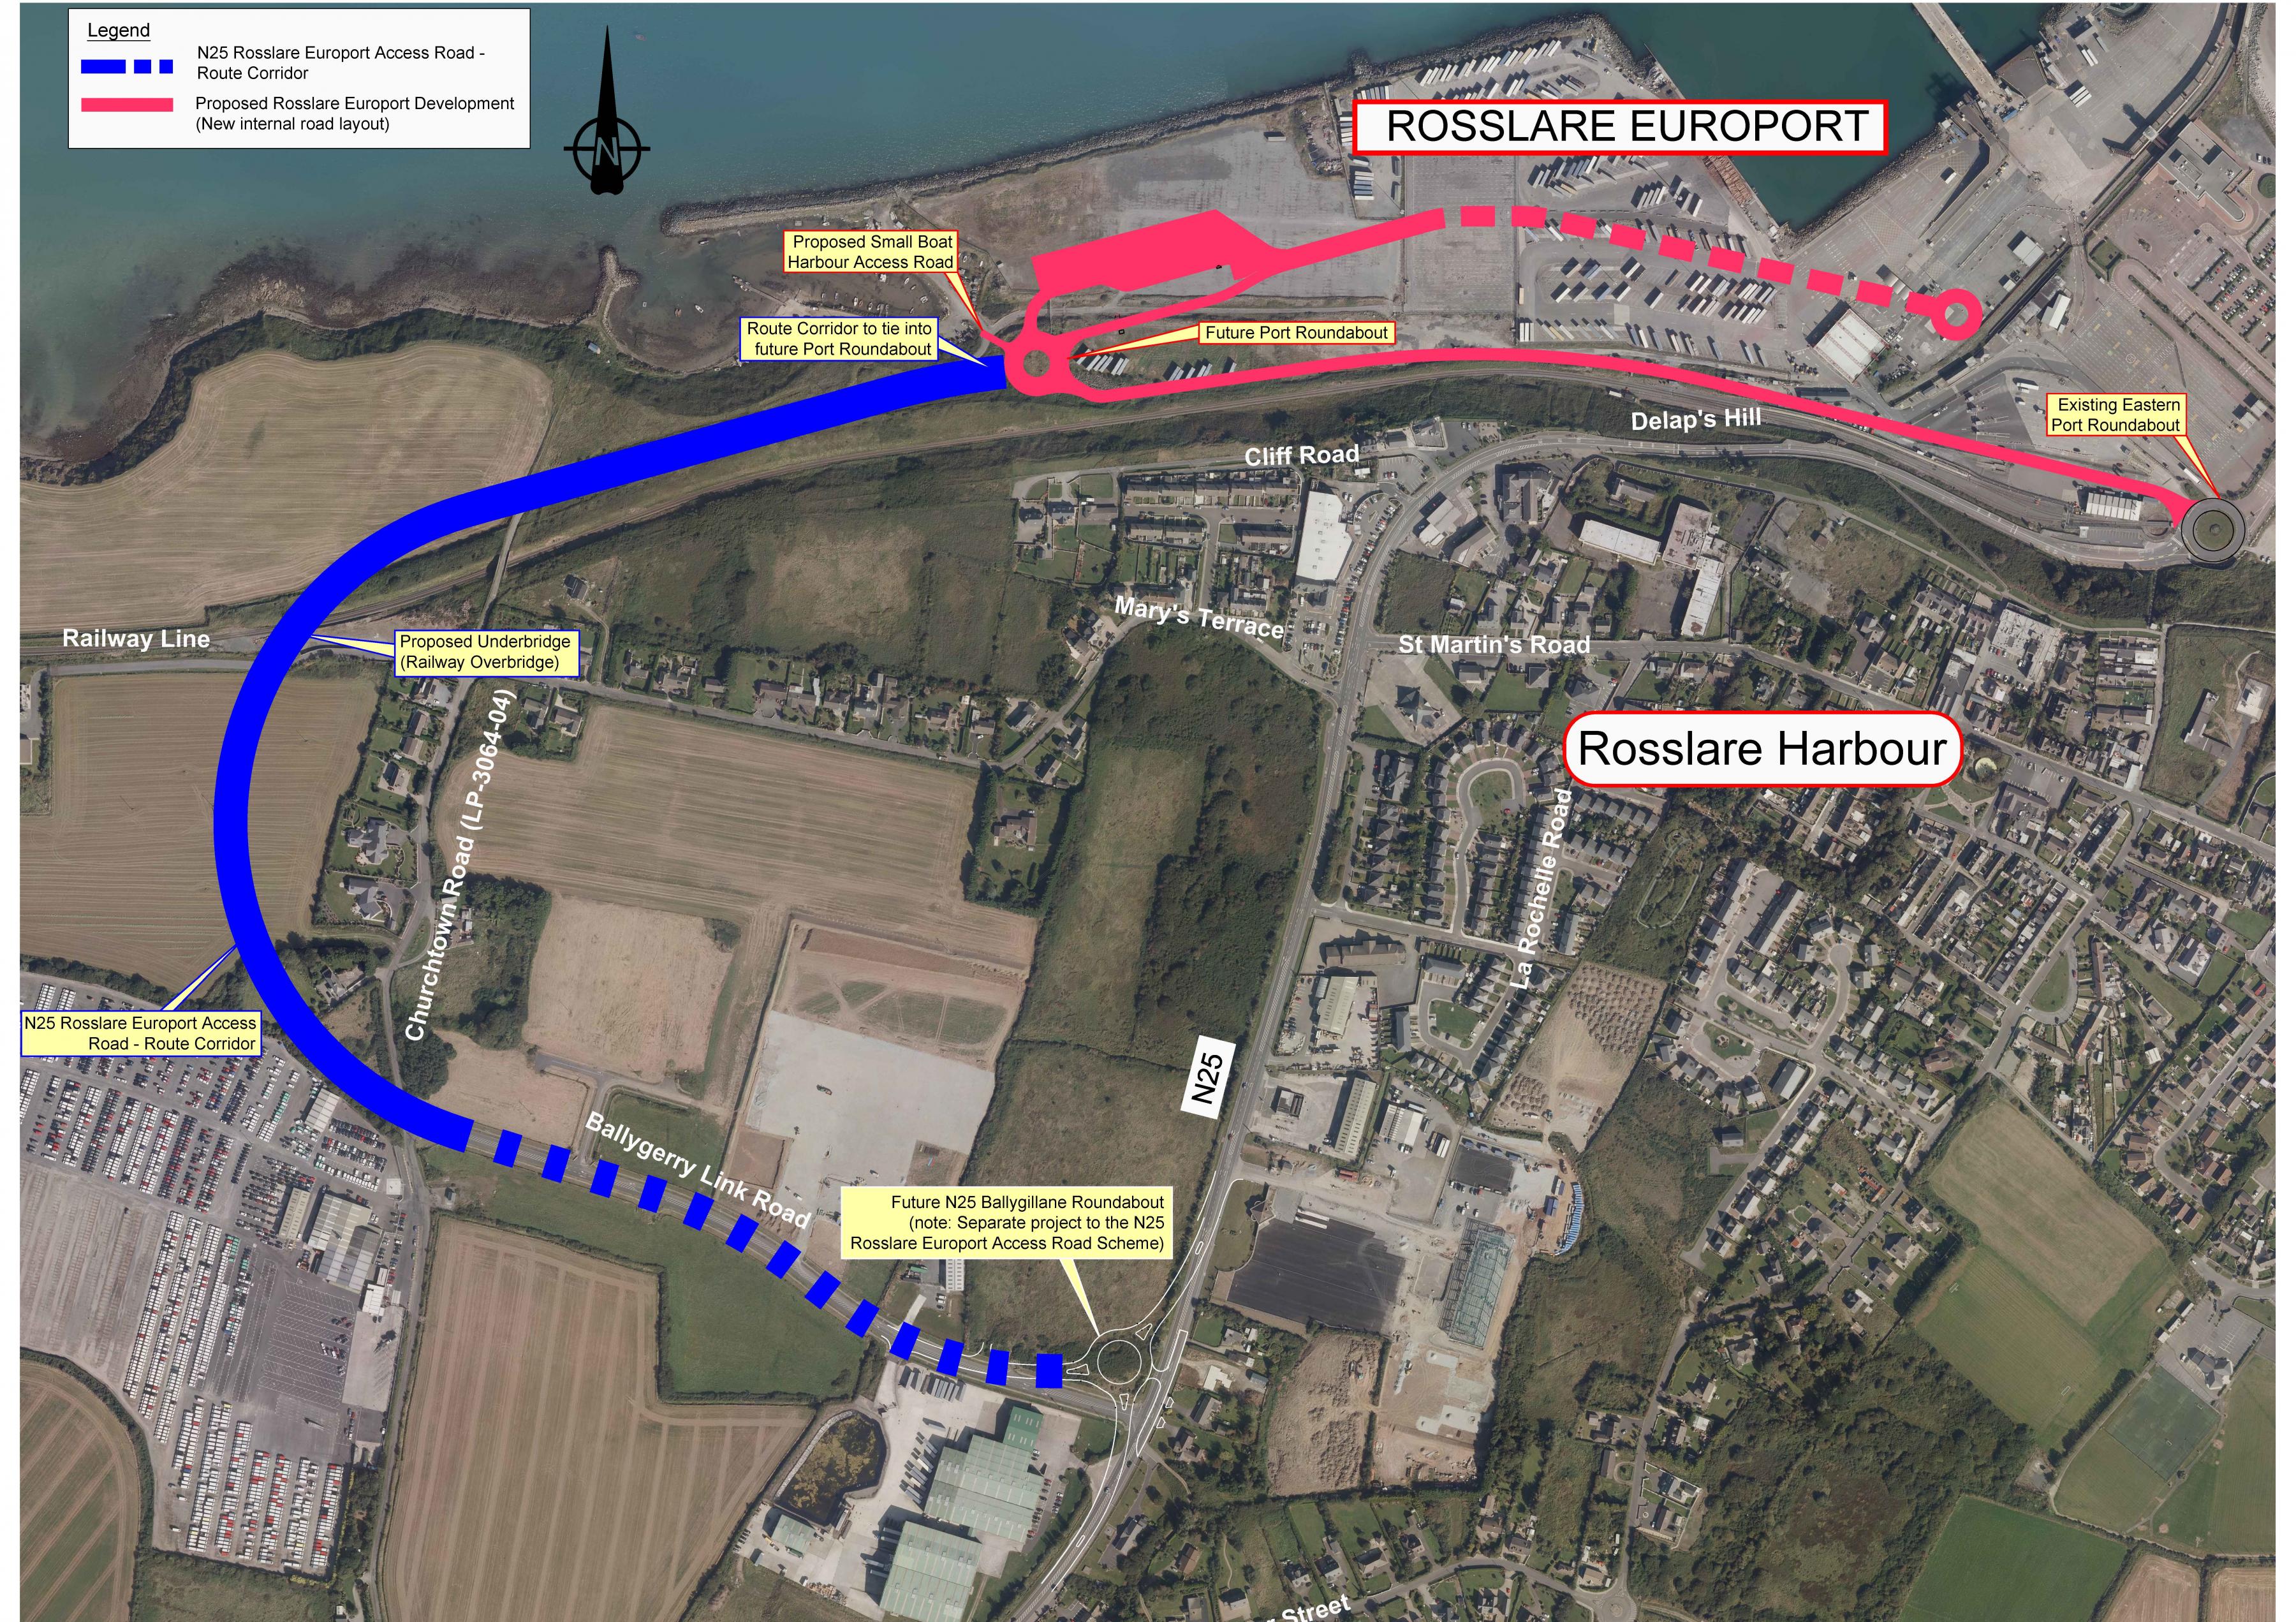 Image of proposed road at Rosslare Europort